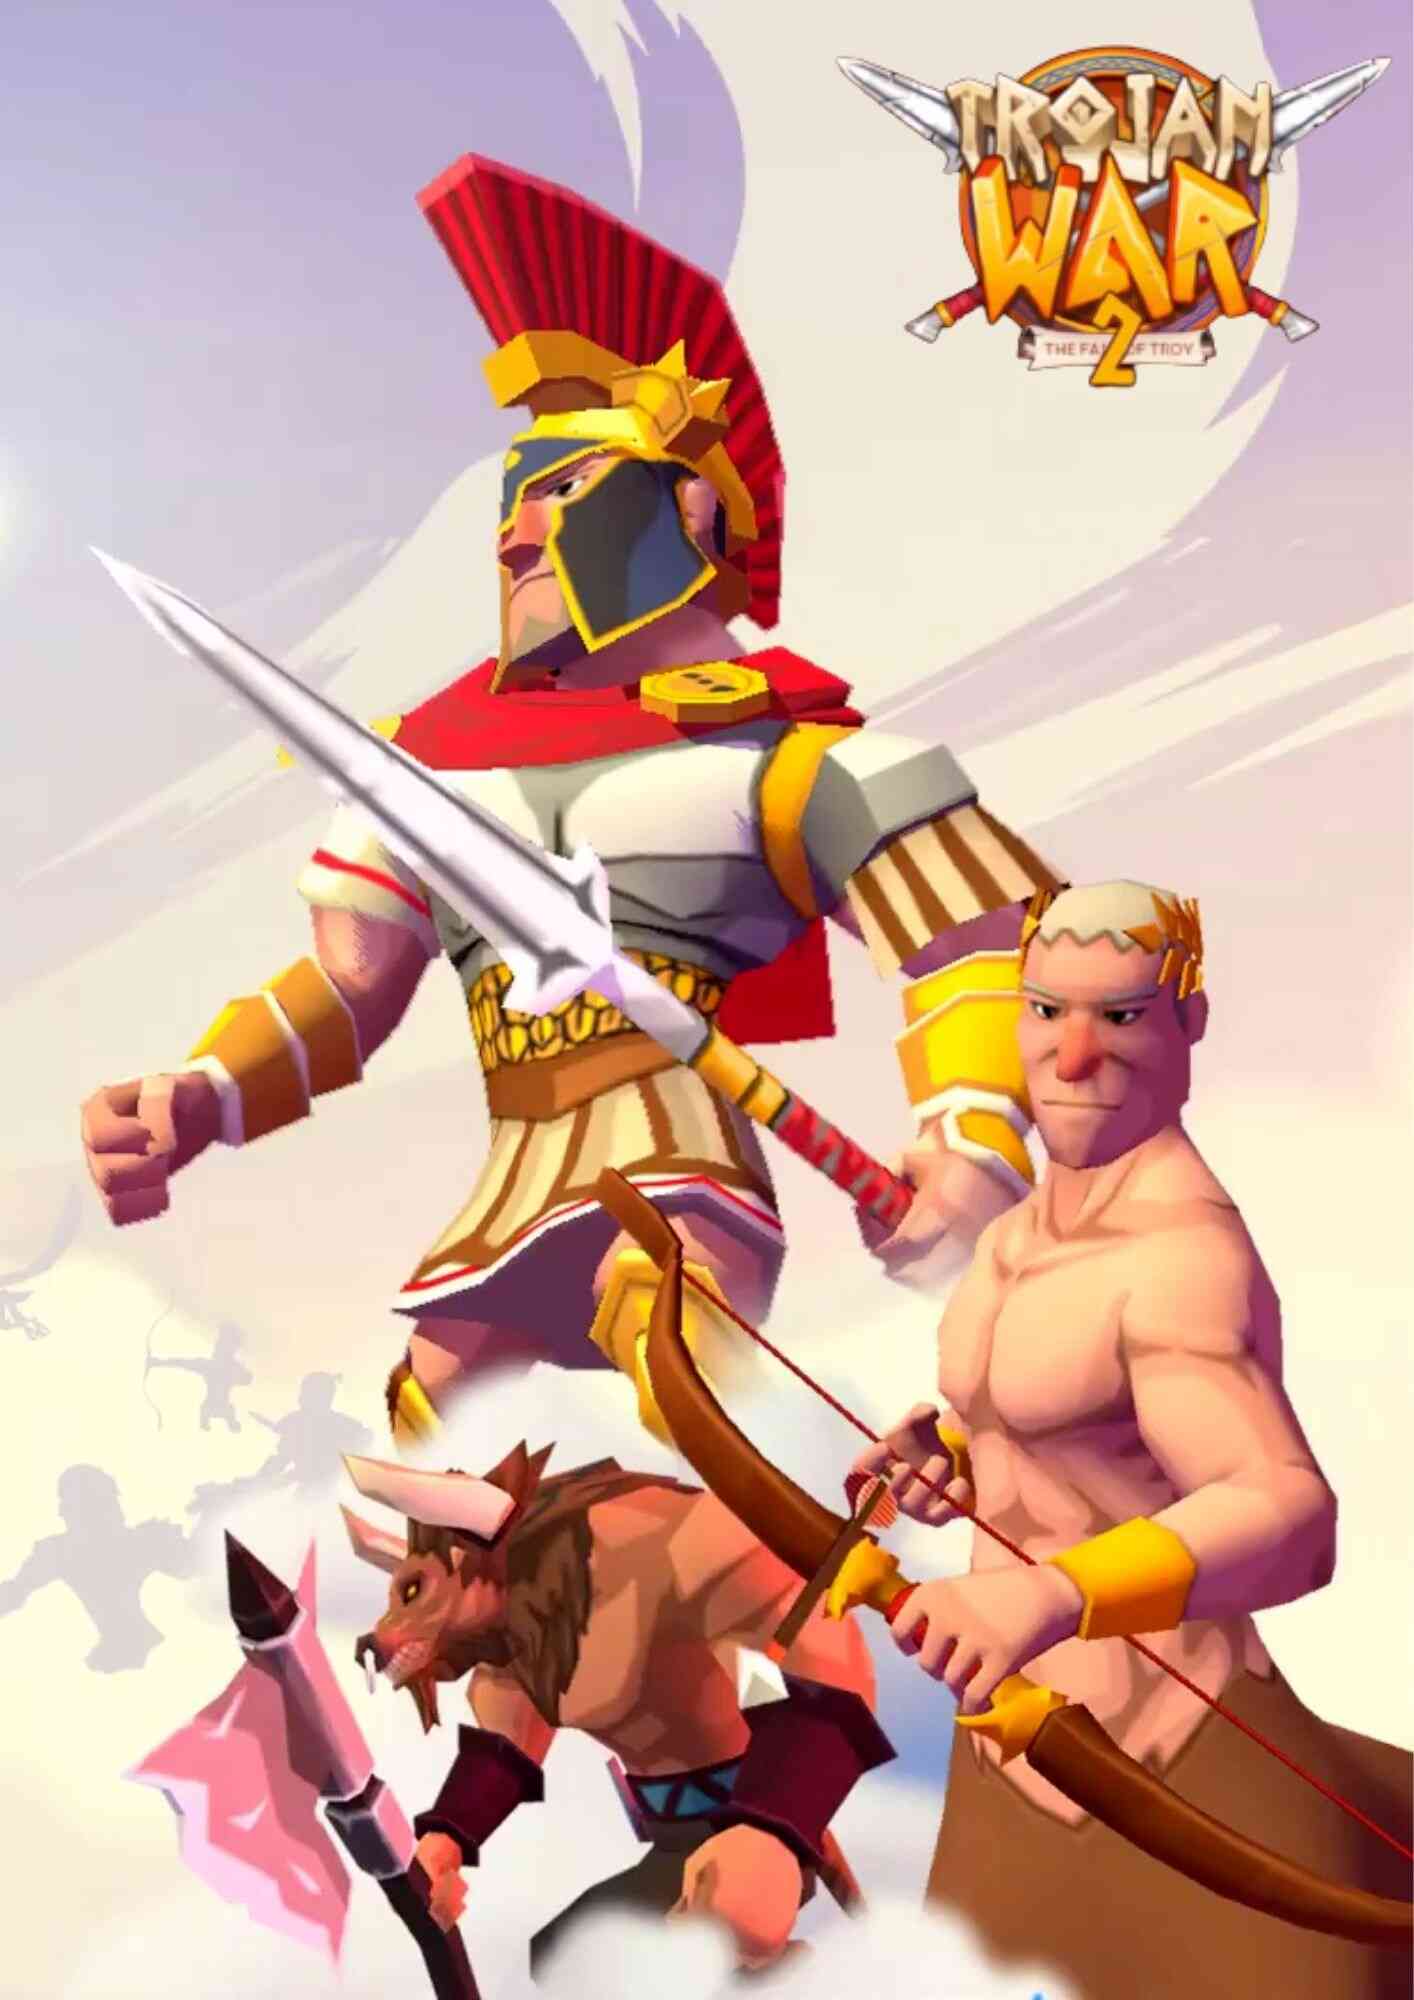 Download Trojan War 2 on Android iOS | Mobile Game Search Engine